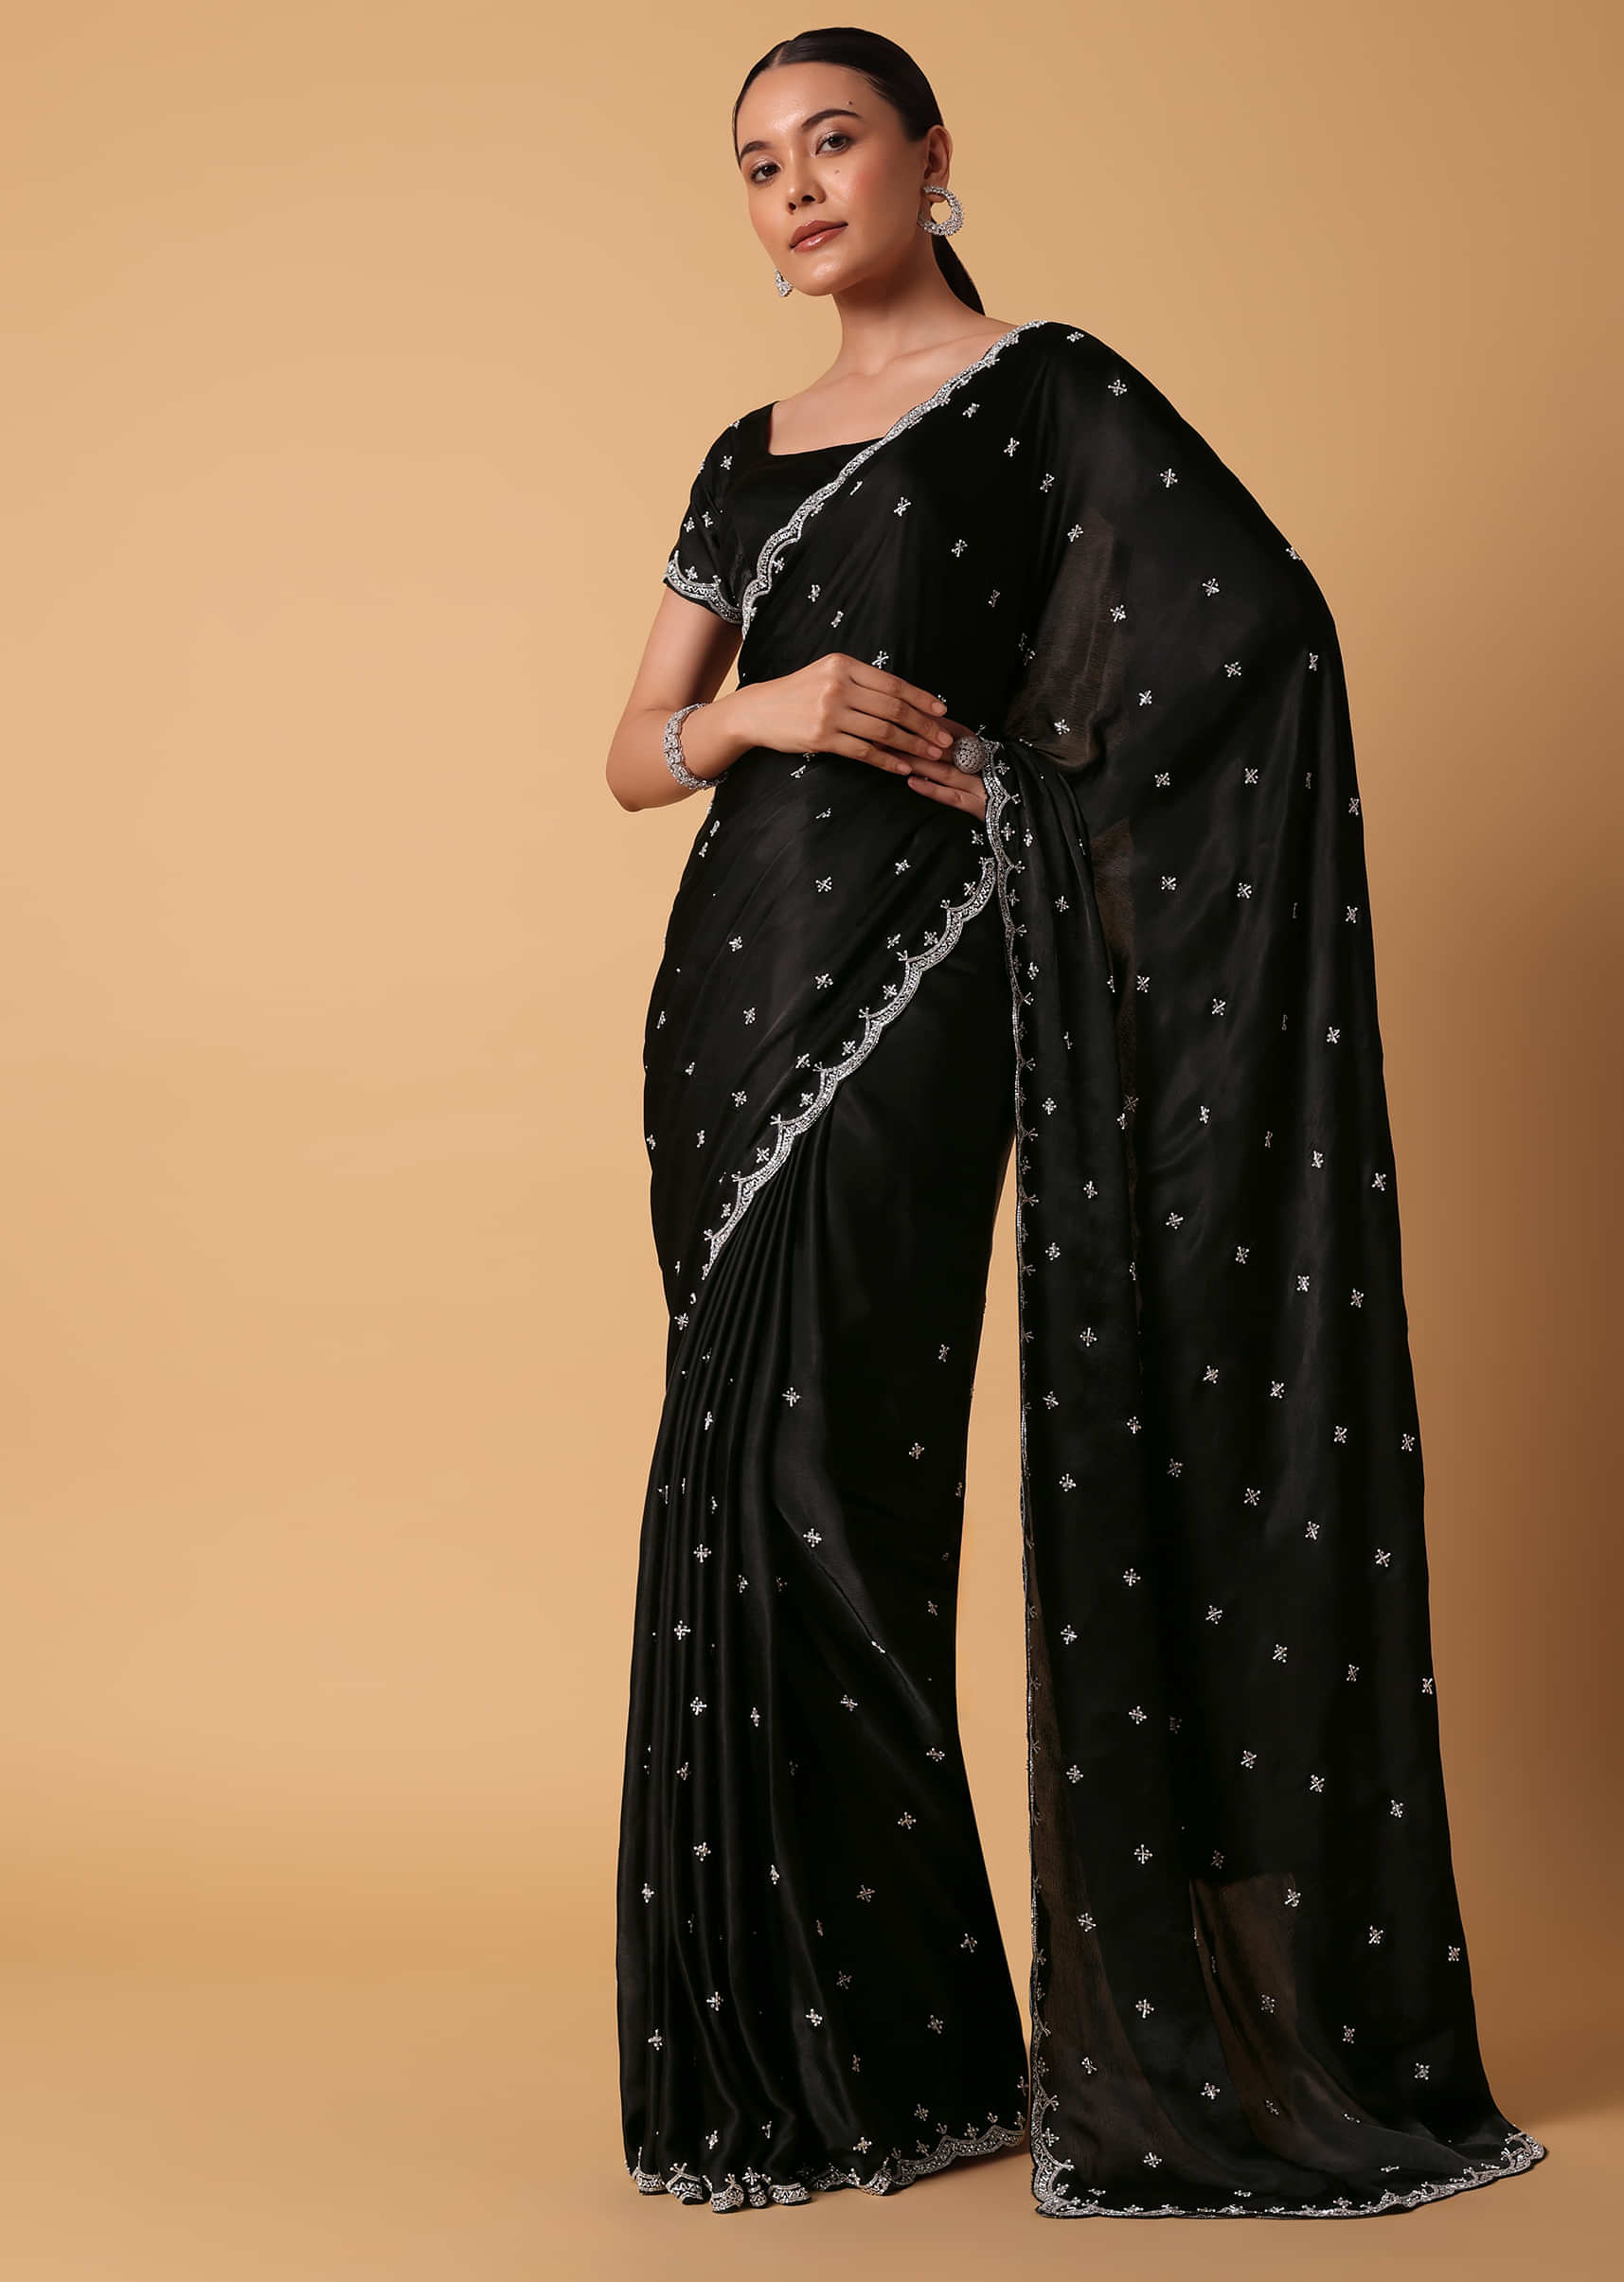 How To Wear Sartin Saree In Bollywood Style-How To Tie Saree To